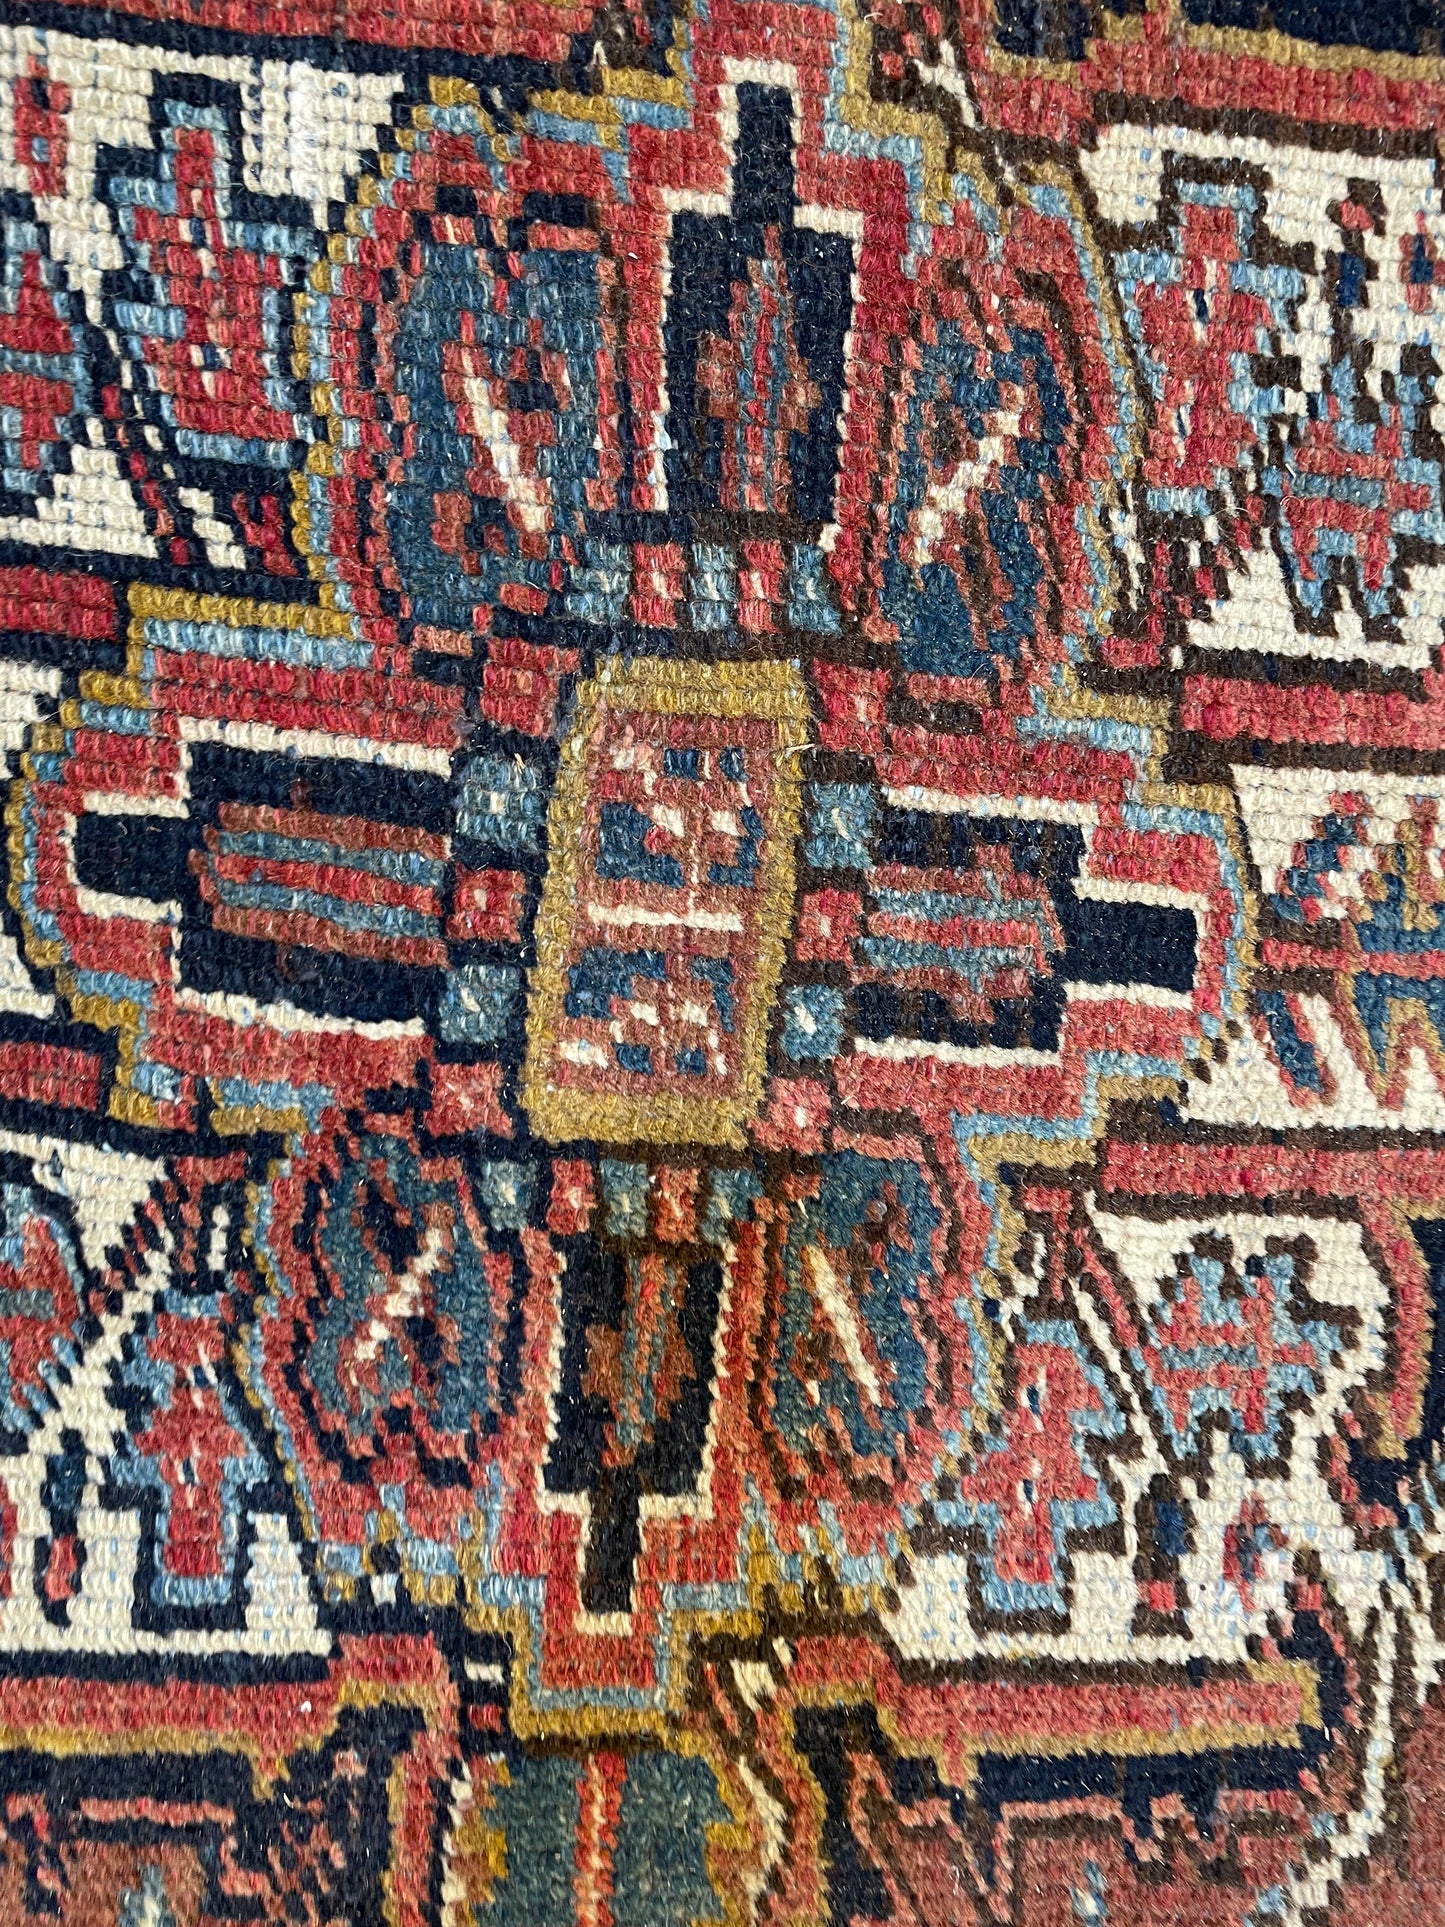 Antique Hand-Knotted Wool Area Rug Heriz Serapi 7'11" x 11'11"